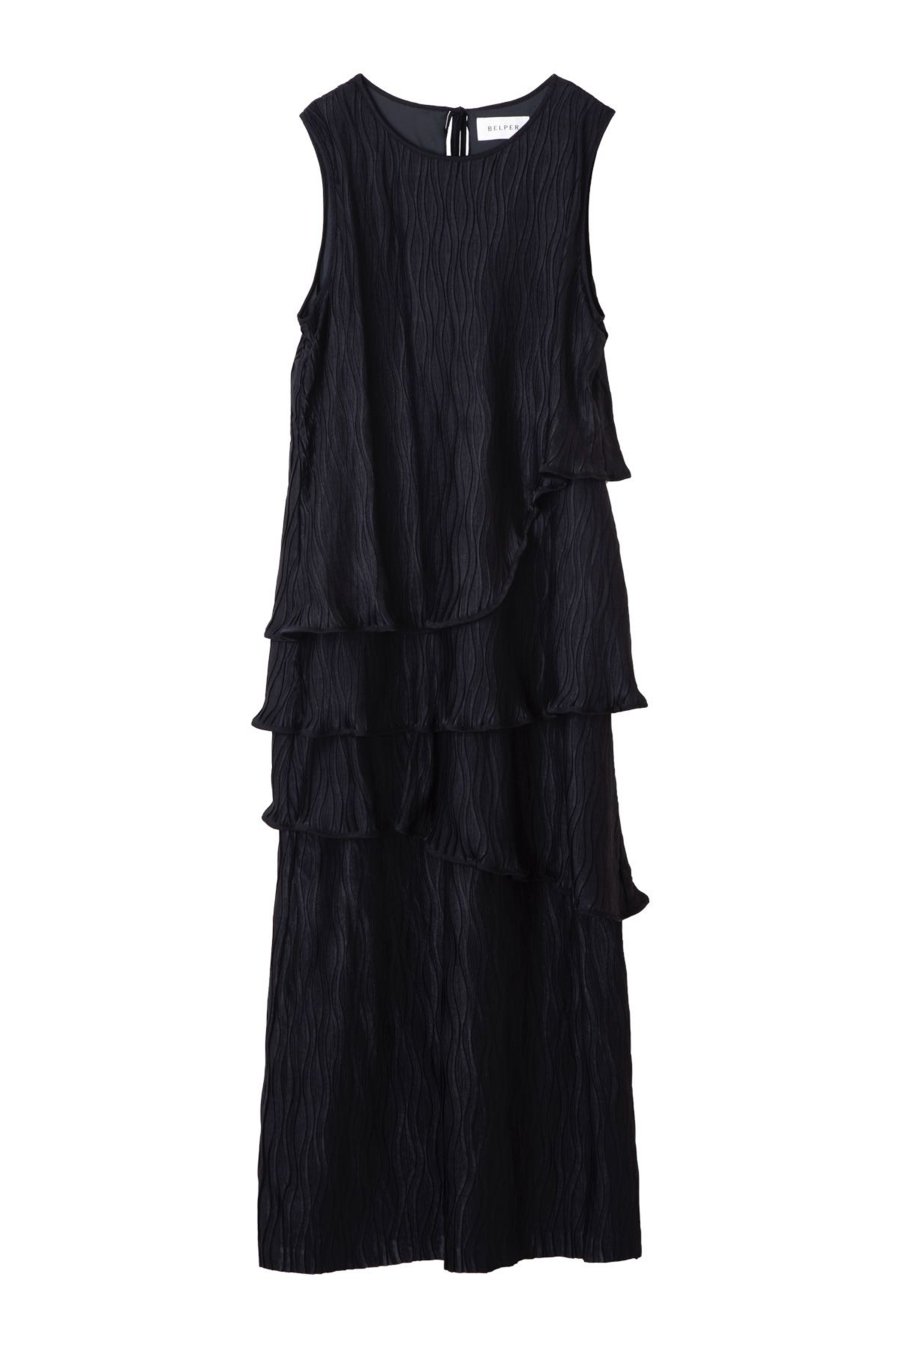 BELPER 22ss PLEATED DRESS(BLACK)<img class='new_mark_img2' src='https://img.shop-pro.jp/img/new/icons15.gif' style='border:none;display:inline;margin:0px;padding:0px;width:auto;' />